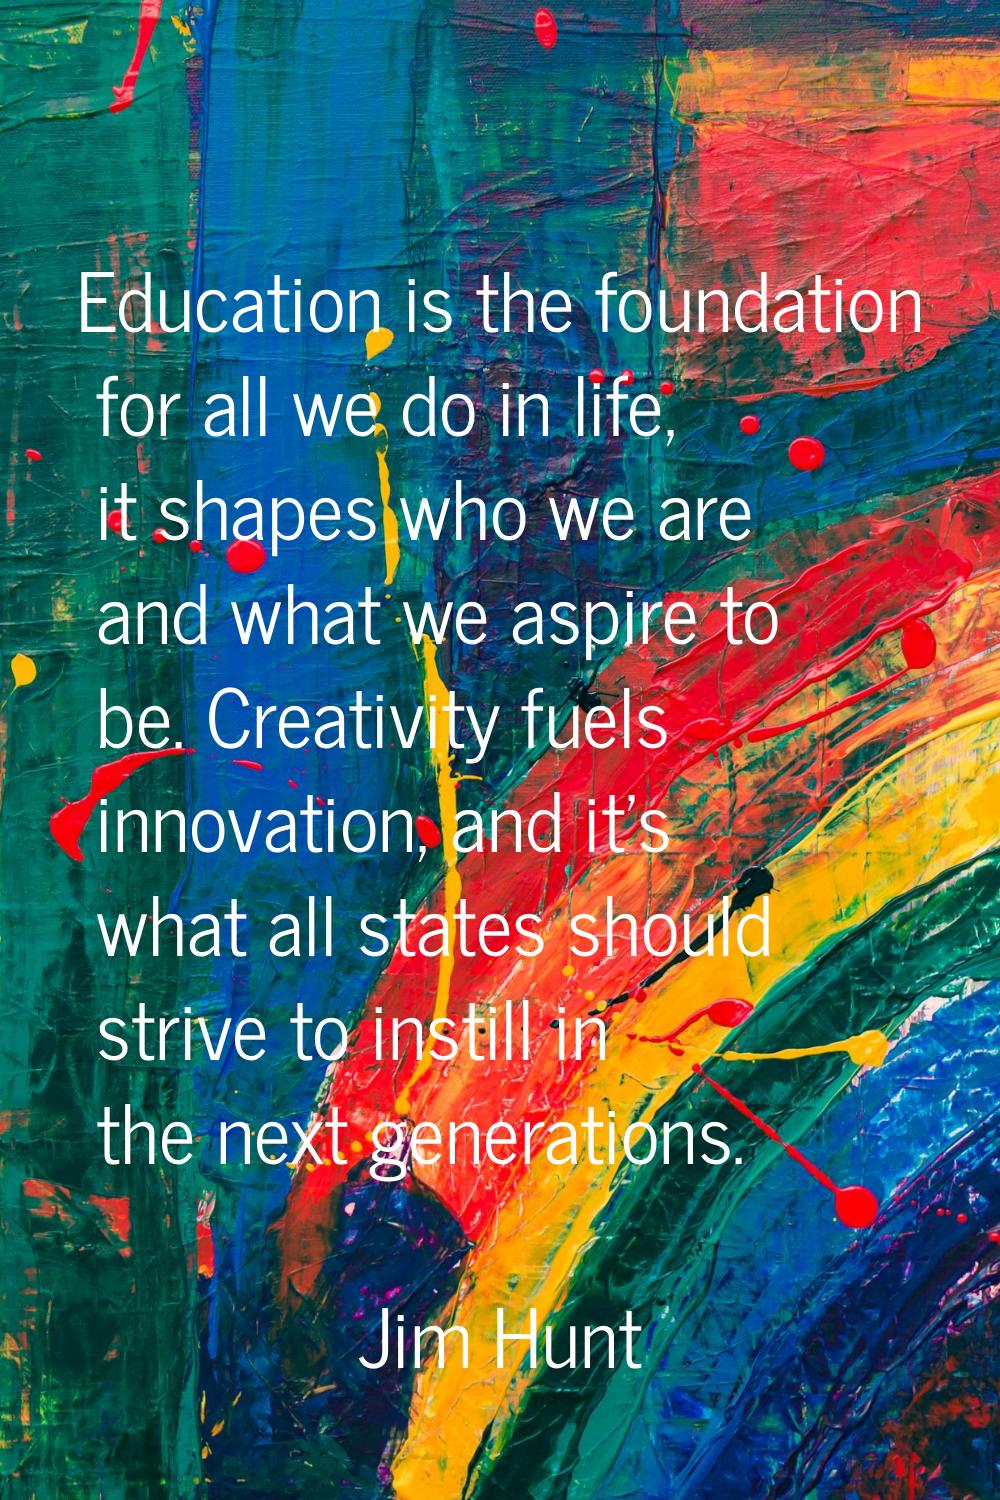 Education is the foundation for all we do in life, it shapes who we are and what we aspire to be. C